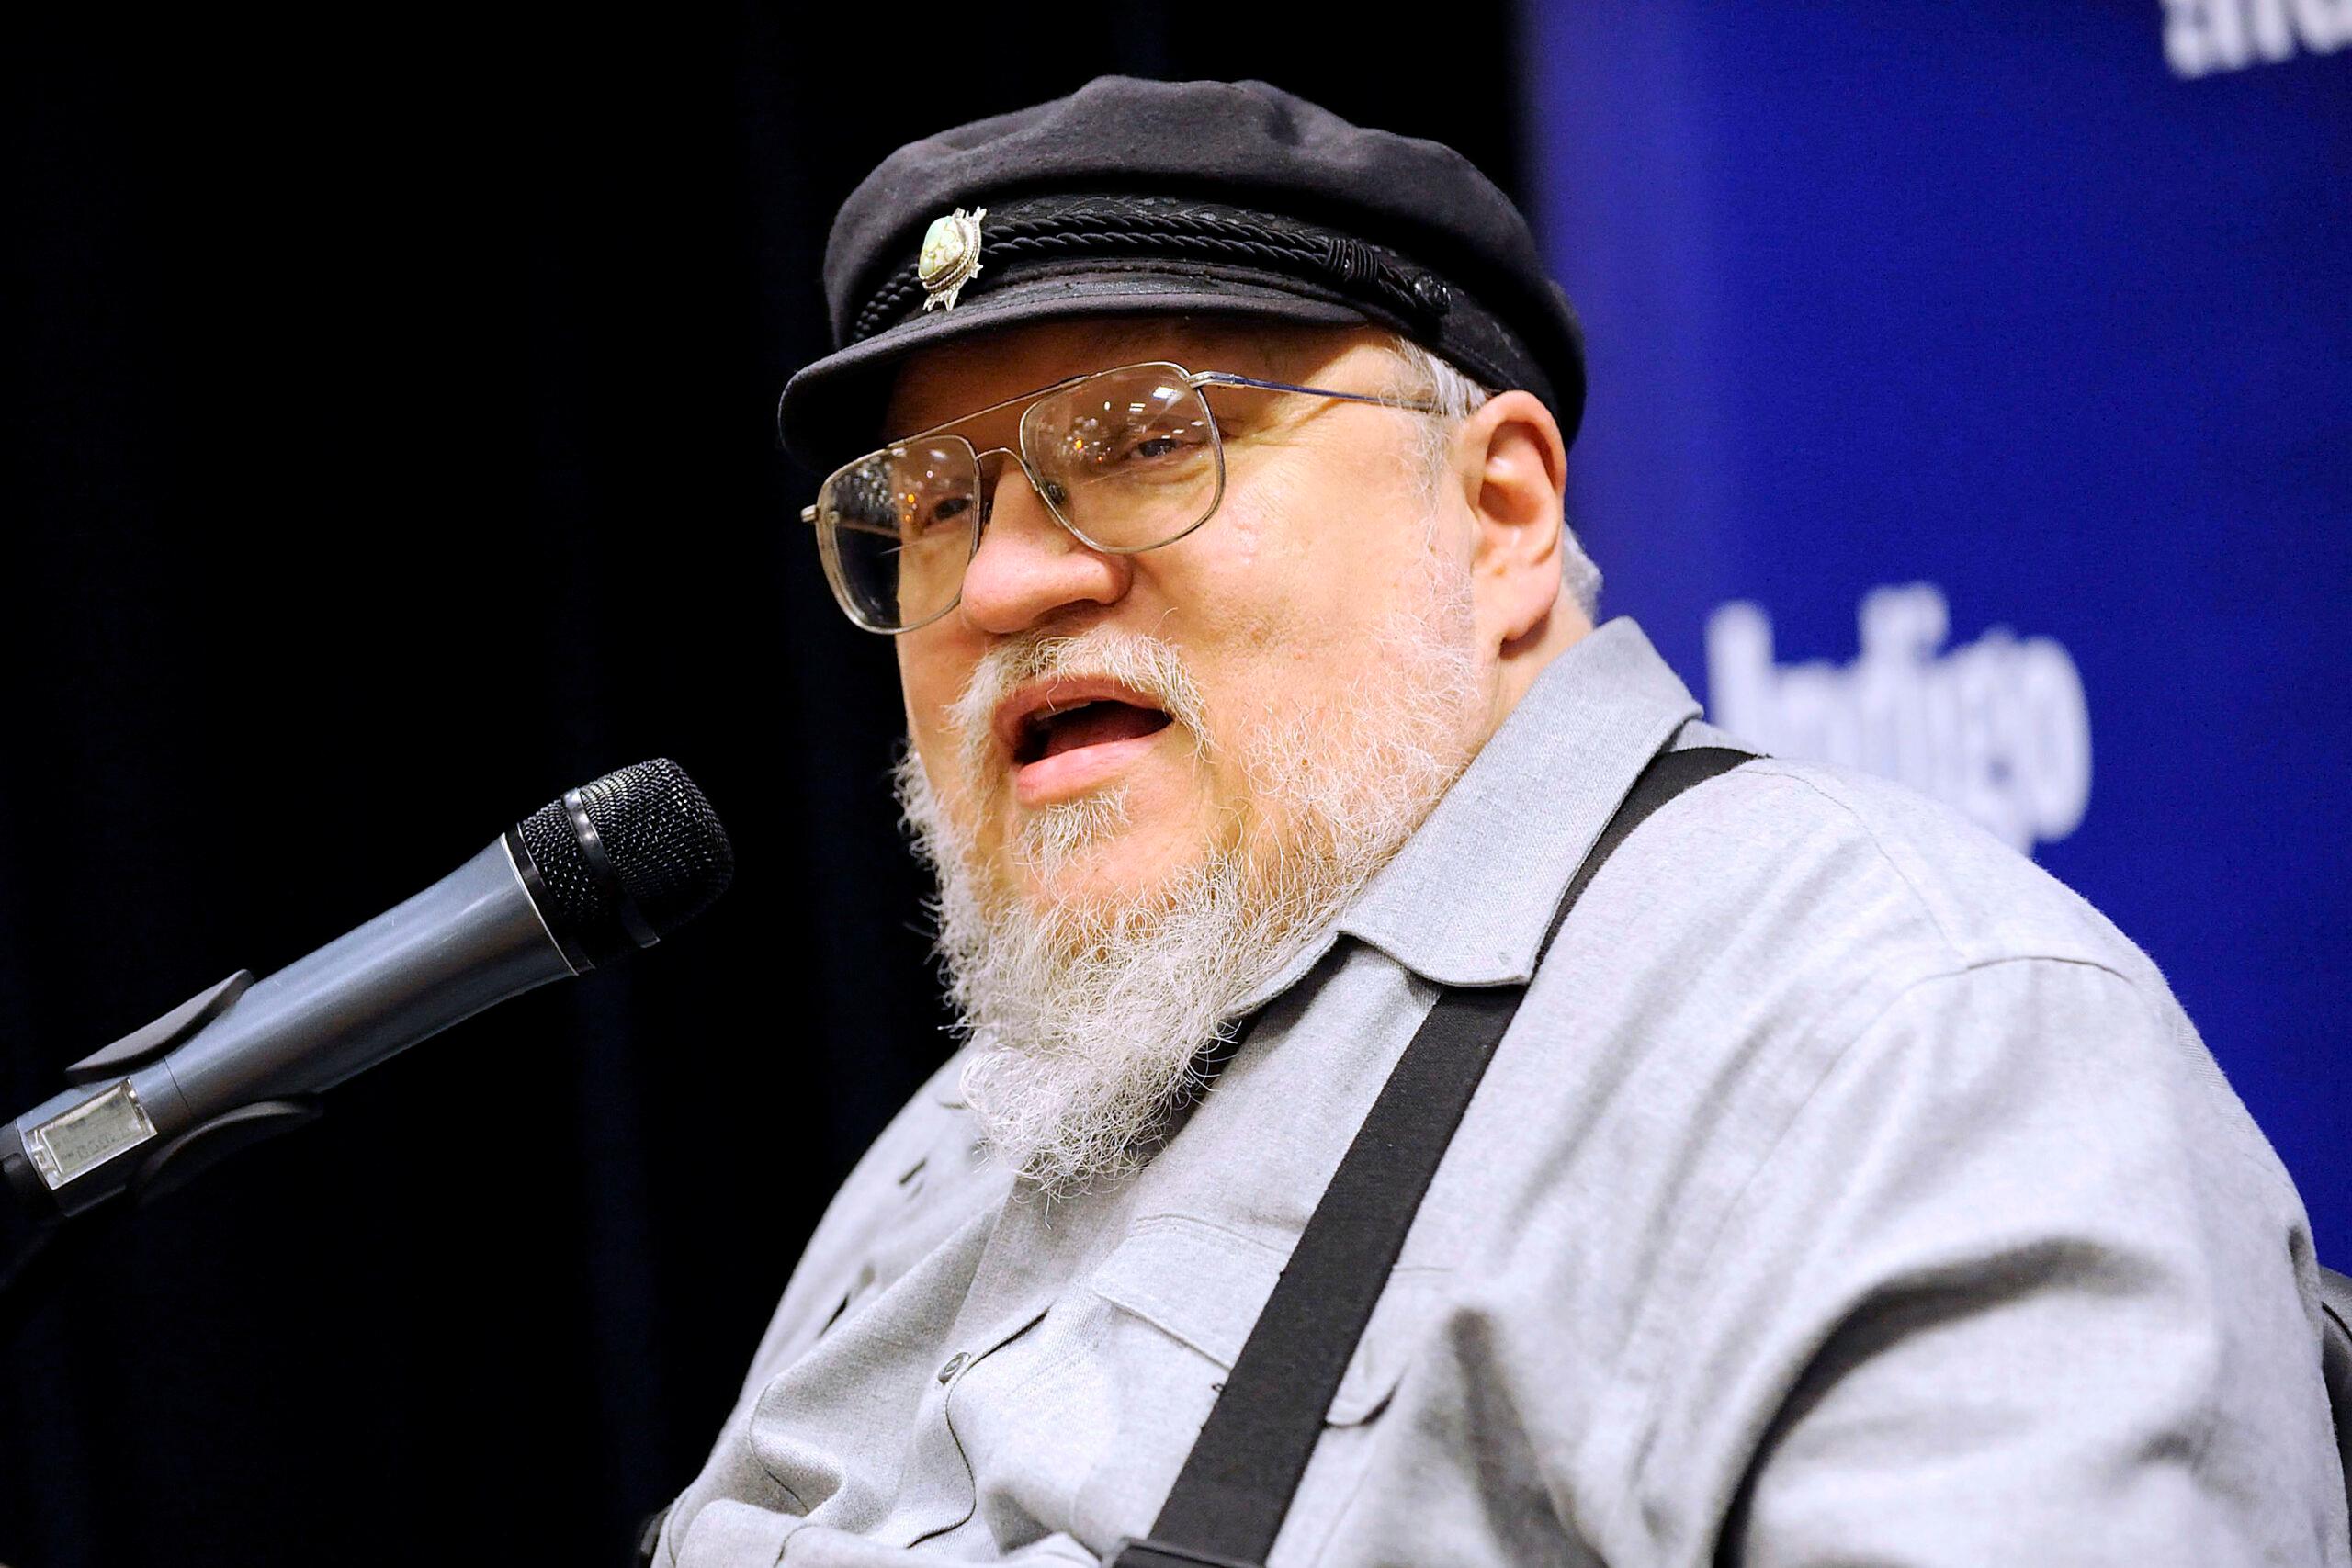 George R.R. Martin book signing at Indigo Manulife Centre for his newest book 'A Dance With Dragons'. Toronto, Canada - 13.03.12 Credit:Dominic Chan/ WENN.com 